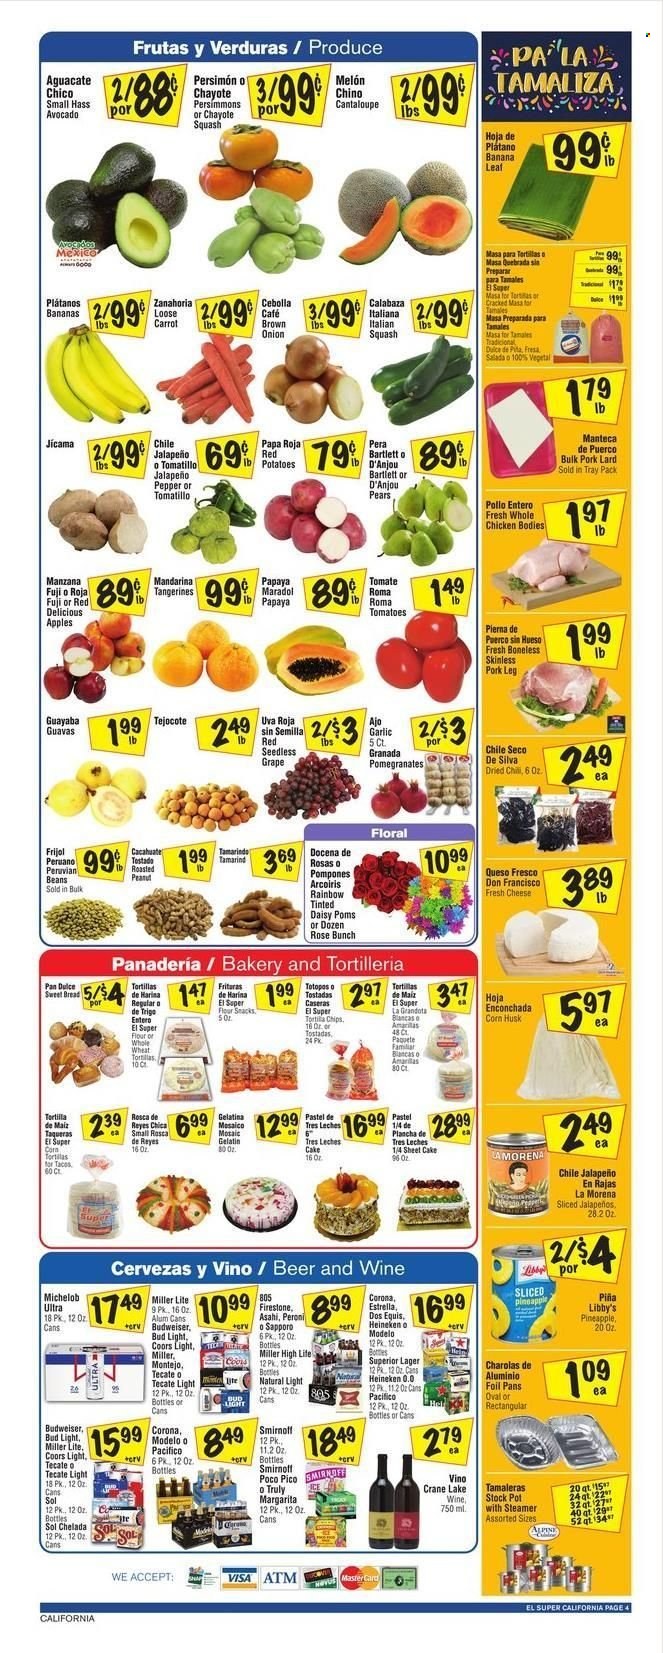 thumbnail - El Super Flyer - 11/30/2022 - 12/06/2022 - Sales products - bread, tortillas, pita, cake, tostadas, sweet bread, beans, cantaloupe, corn, garlic, tomatillo, tomatoes, potatoes, jalapeño, chayote squash, apples, avocado, bananas, Red Delicious apples, pineapple, papaya, pears, persimmons, chayote, queso fresco, cheese, lard, snack, chips, tamarind, hoja enconchada, stockpot, oil, wine, rosé wine, Smirnoff, TRULY, beer, Bud Light, Corona Extra, Heineken, Peroni, Sol, Lager, Modelo, whole chicken, pork meat, pork leg, Budweiser, Miller Lite, tangerines, jicama, melons, Coors, Dos Equis, Michelob, pomegranate. Page 4.